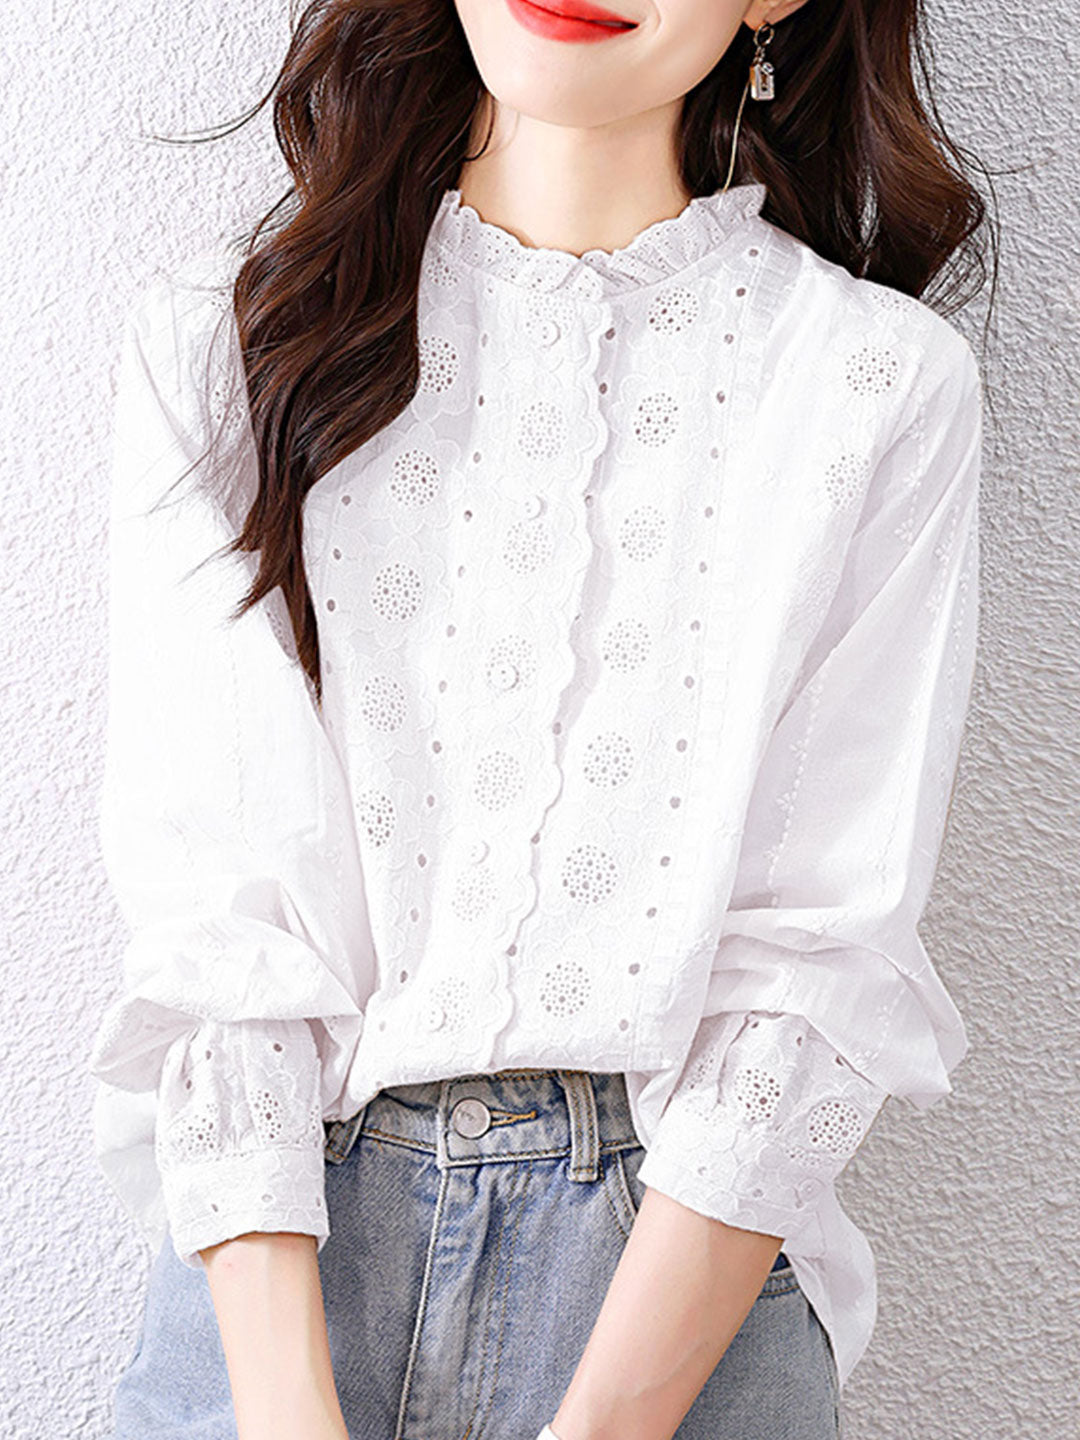 Kylie Retro Lace Collar Embroidery Top